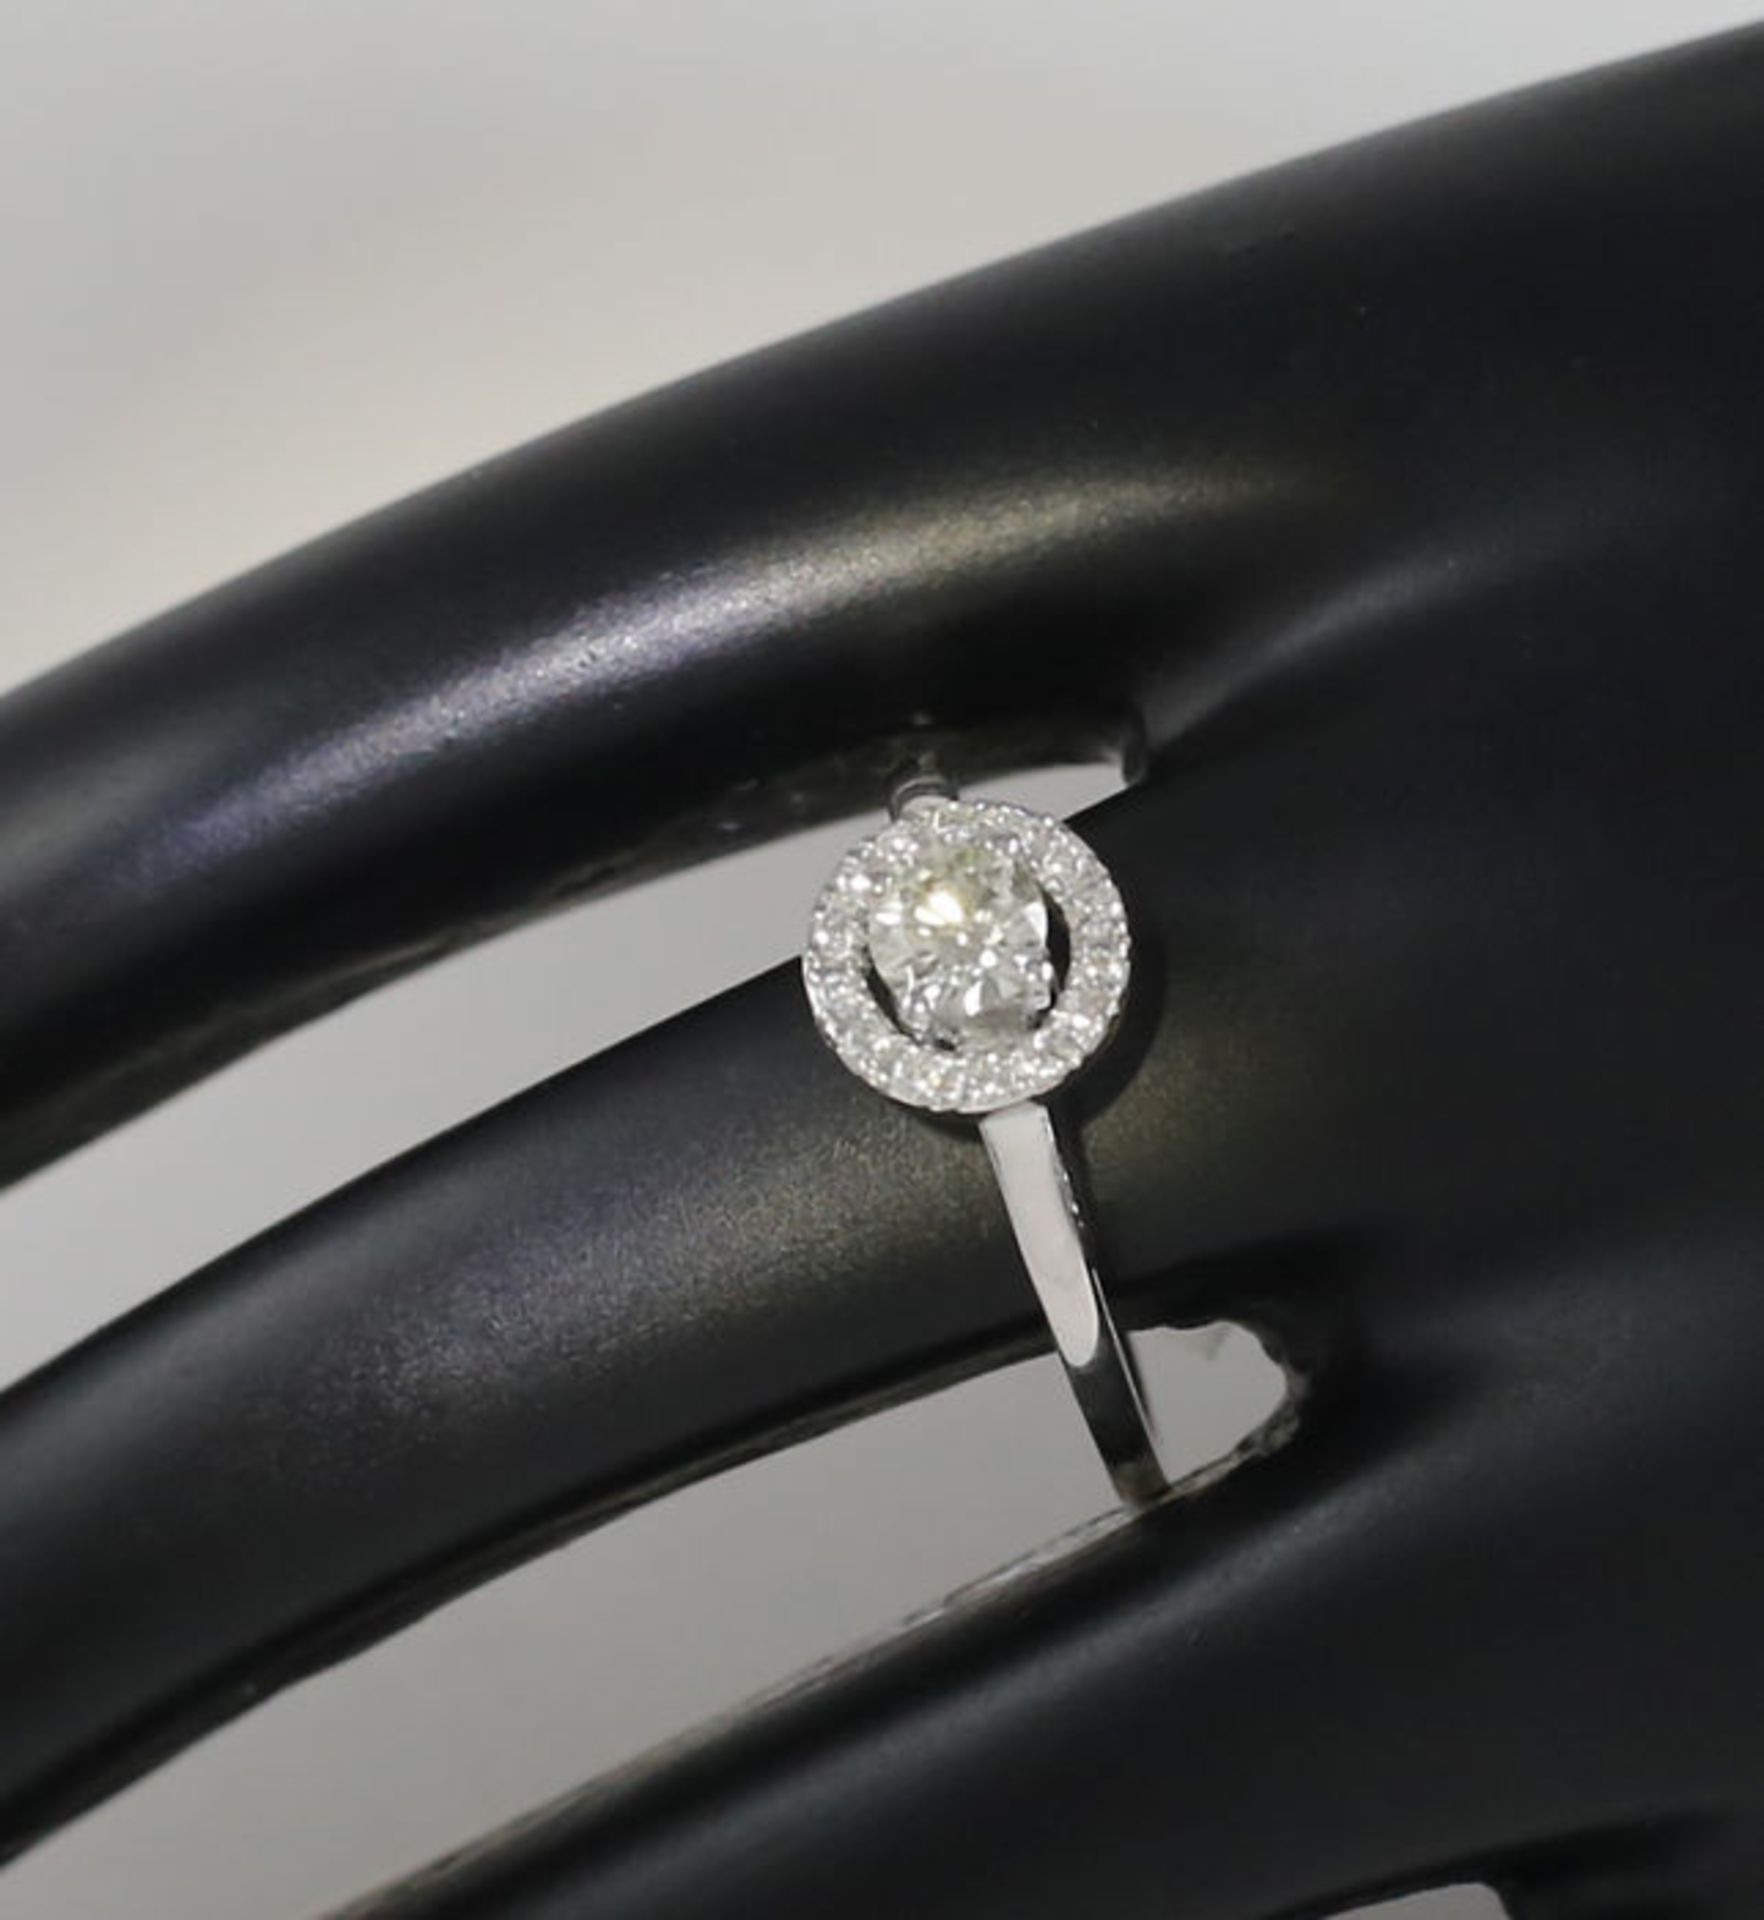 14 K / 585 White Gold Solitaire Diamond Ring - Image 3 of 7